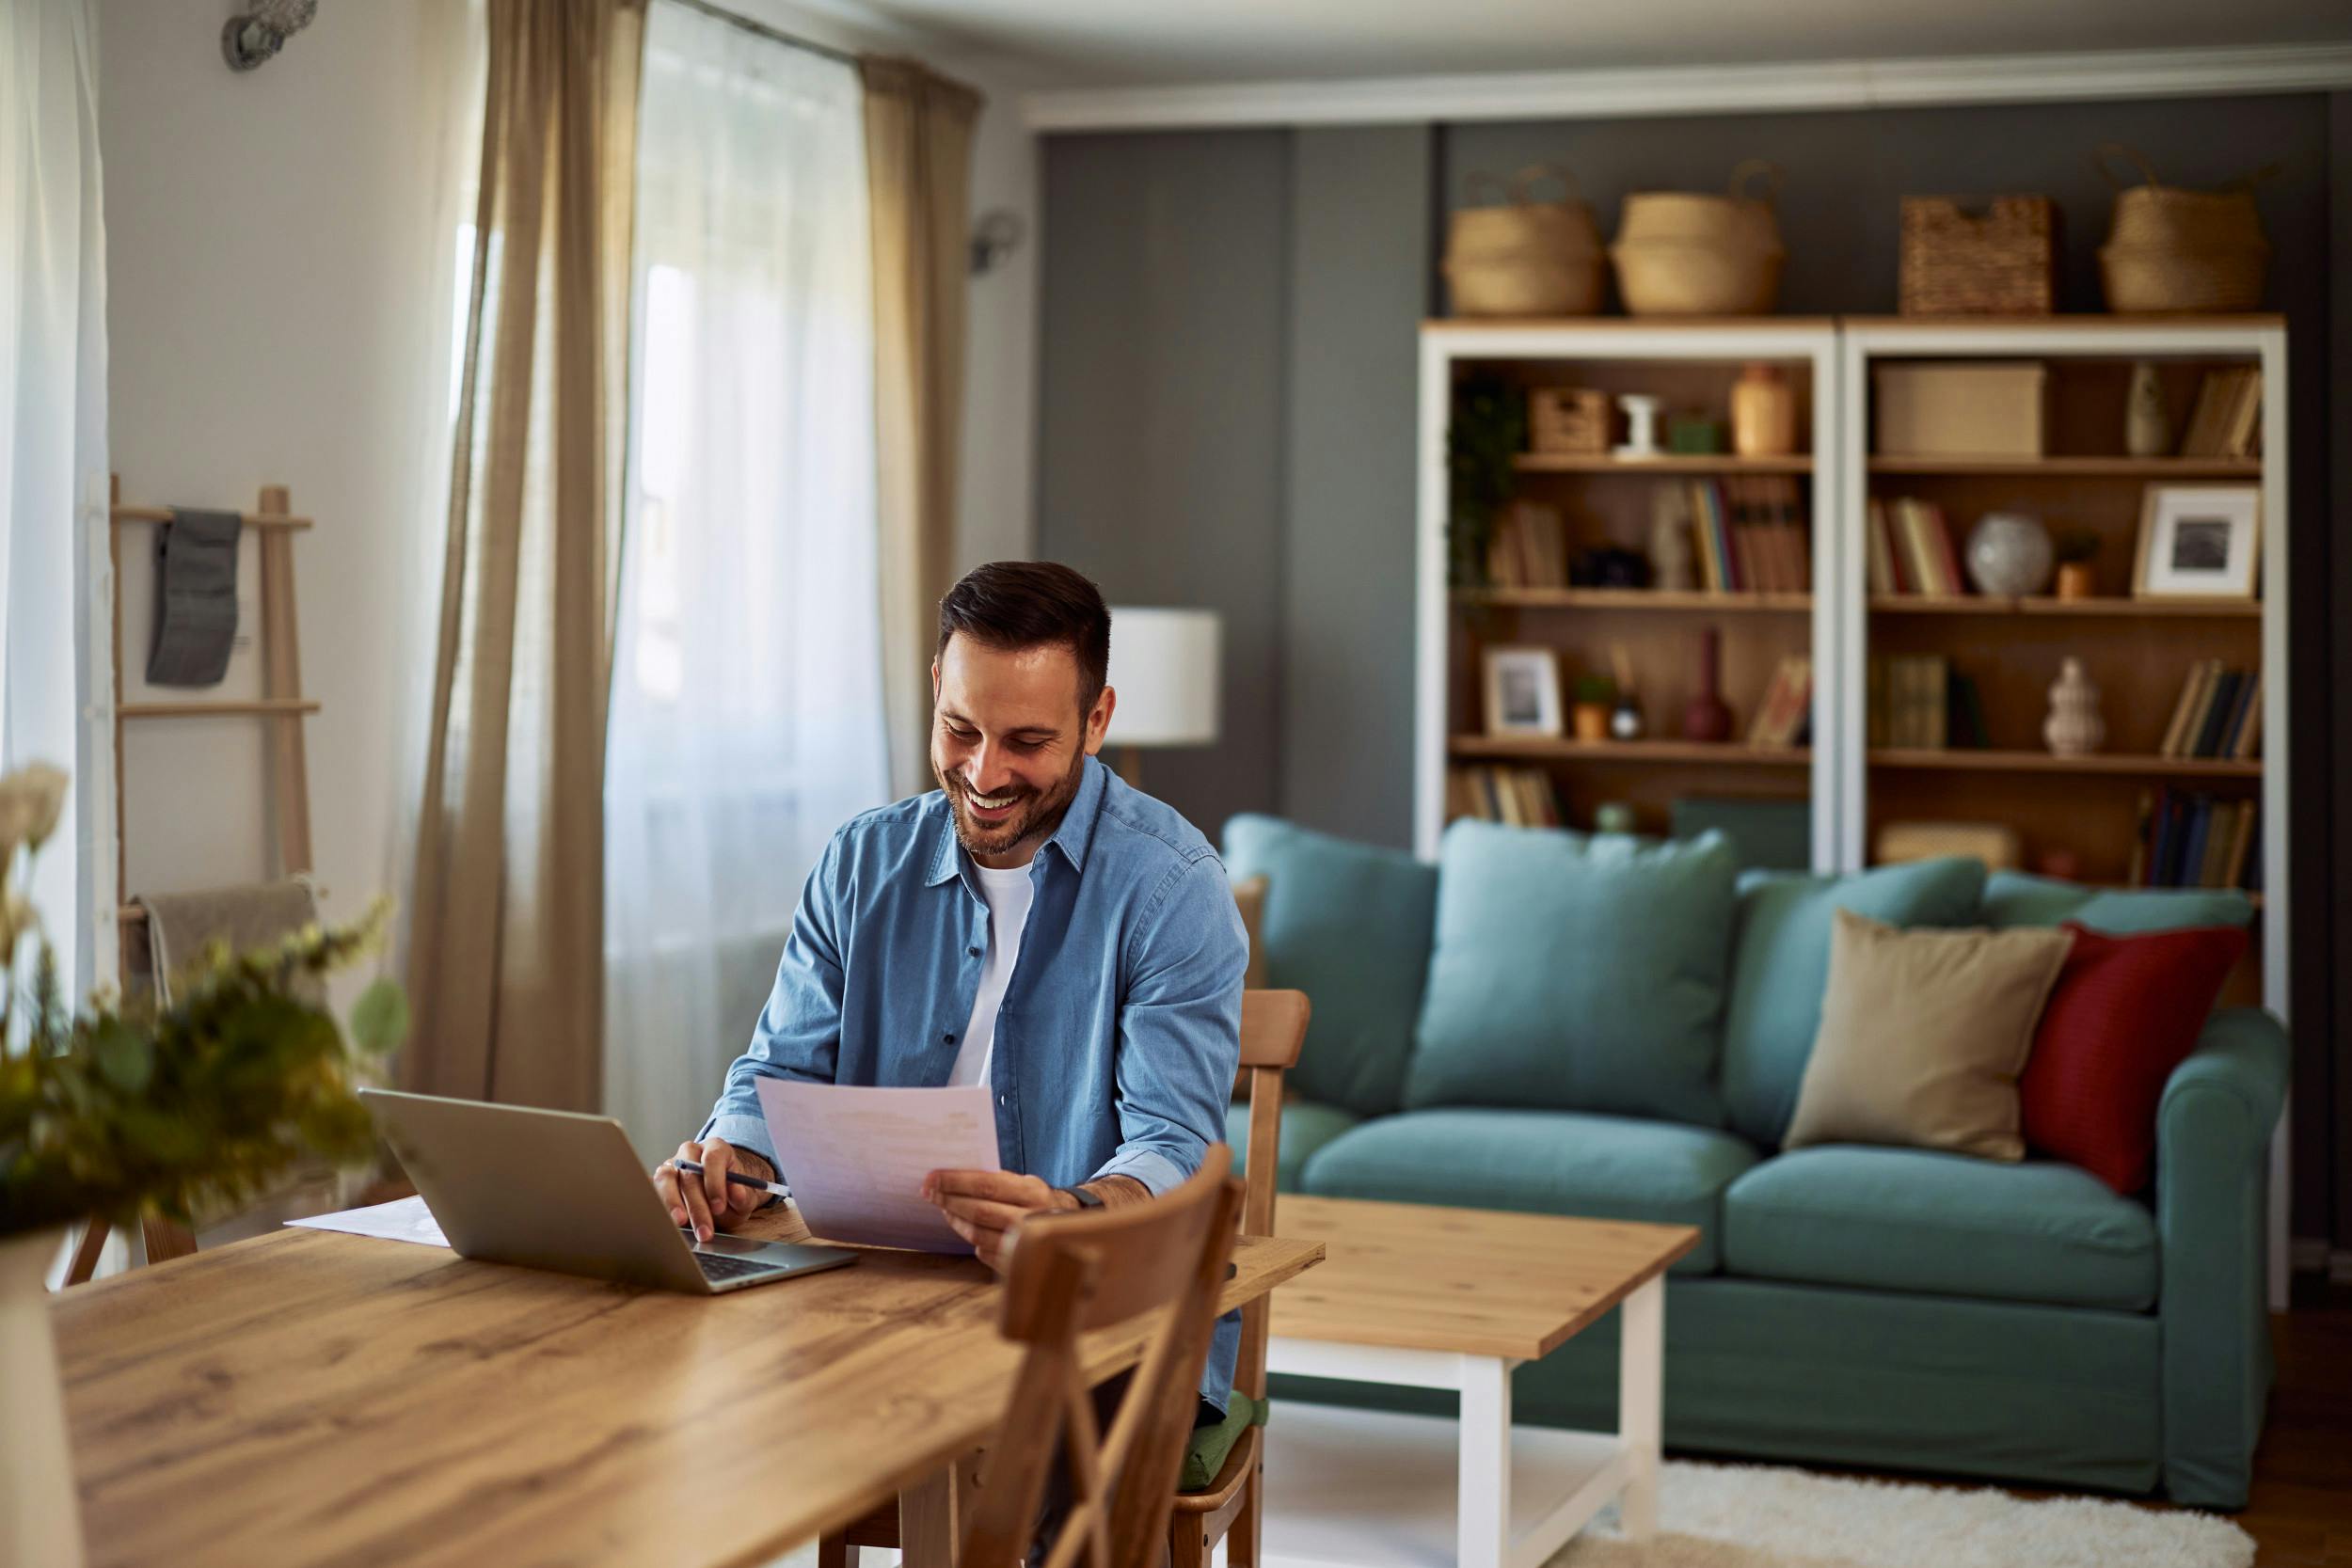 Does Working From Home Lead to Increased Productivity?